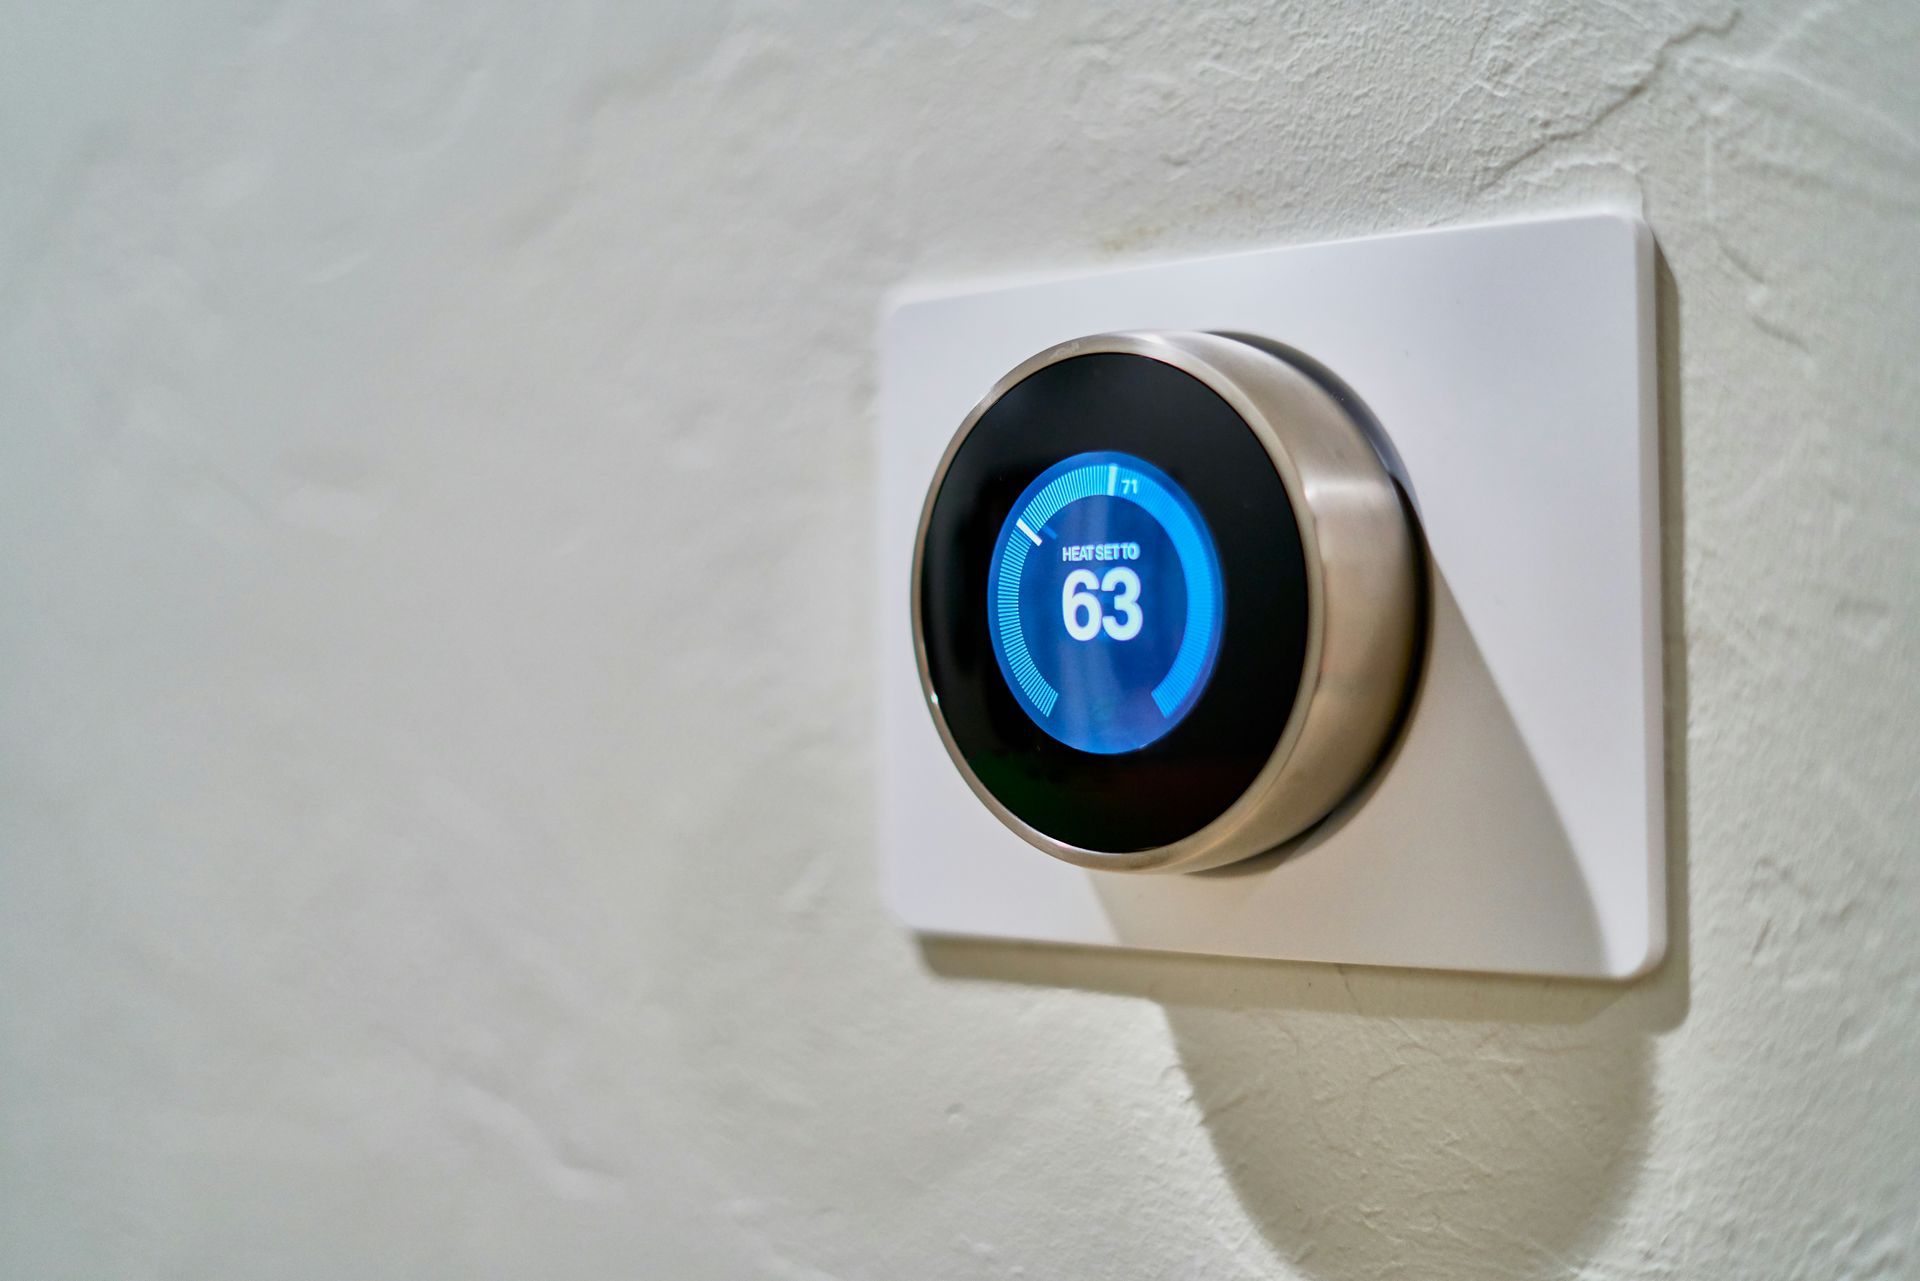 A smart thermostat on a wall.